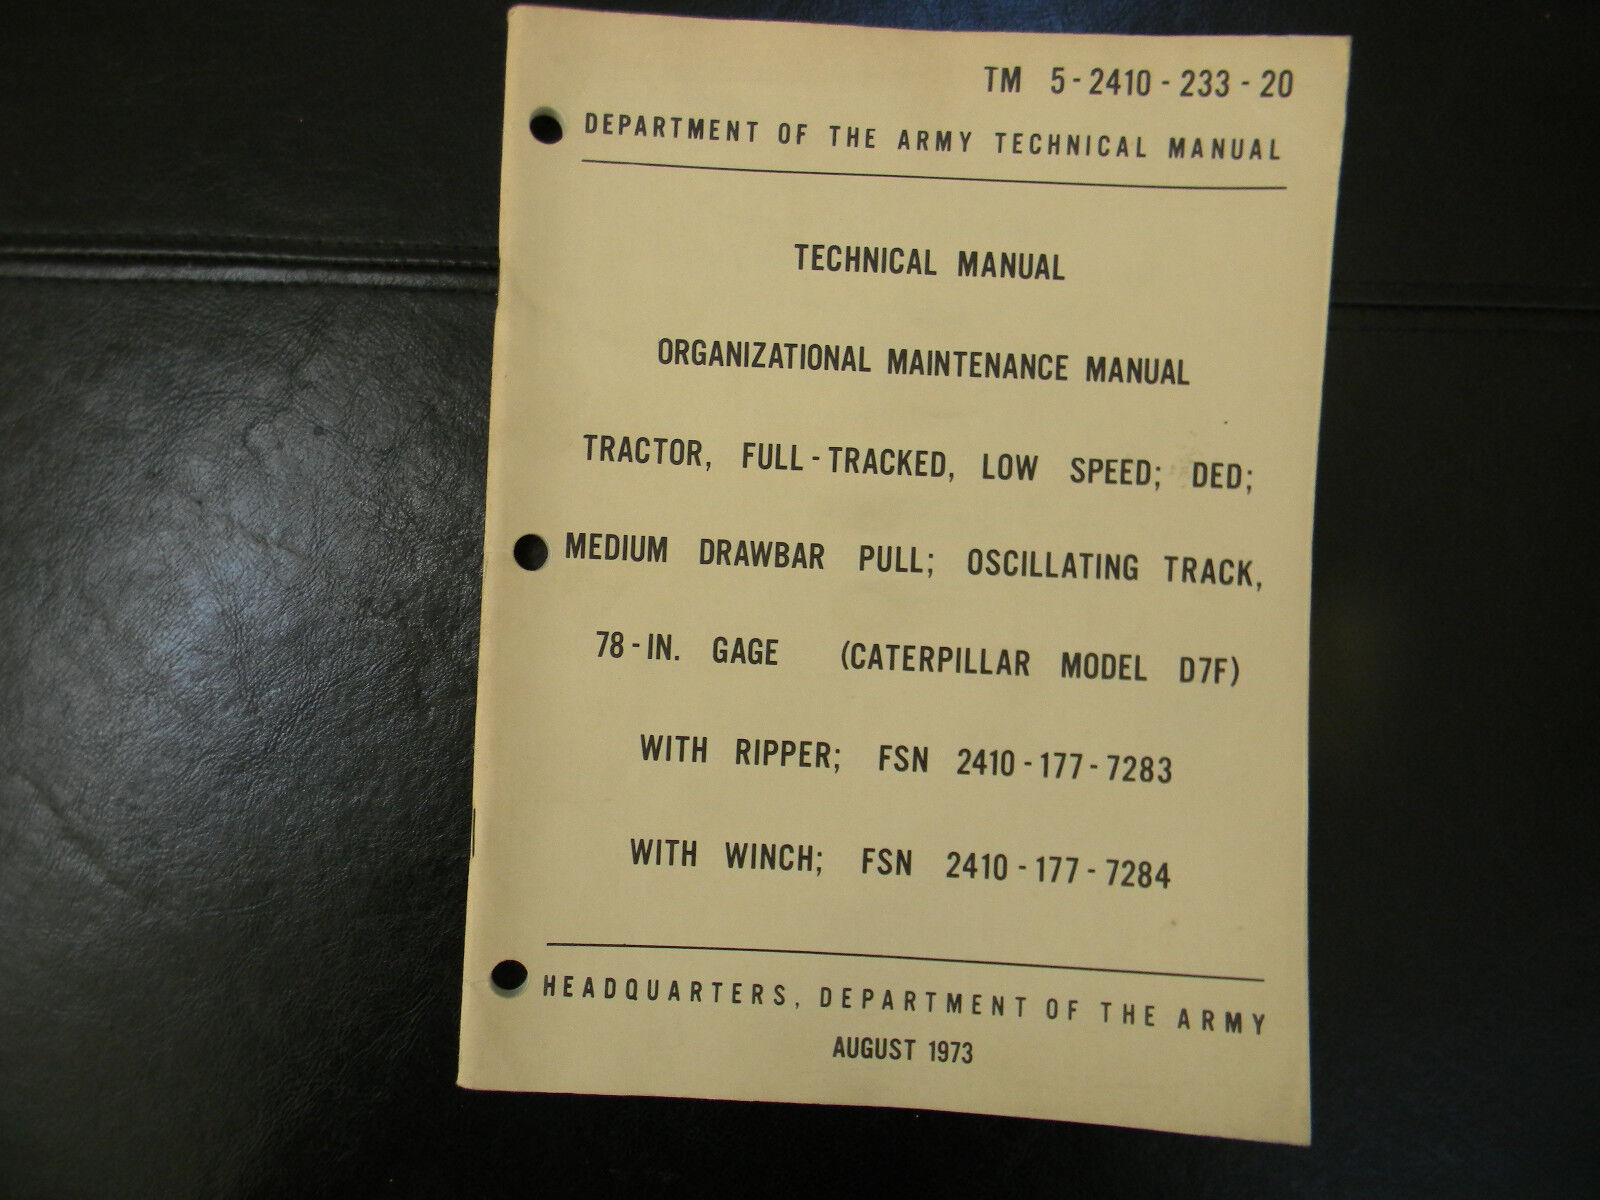 1973 TRACTOR, FULL-TRACKED, Low Speed TM 5-2410-233-20 Tech Manual